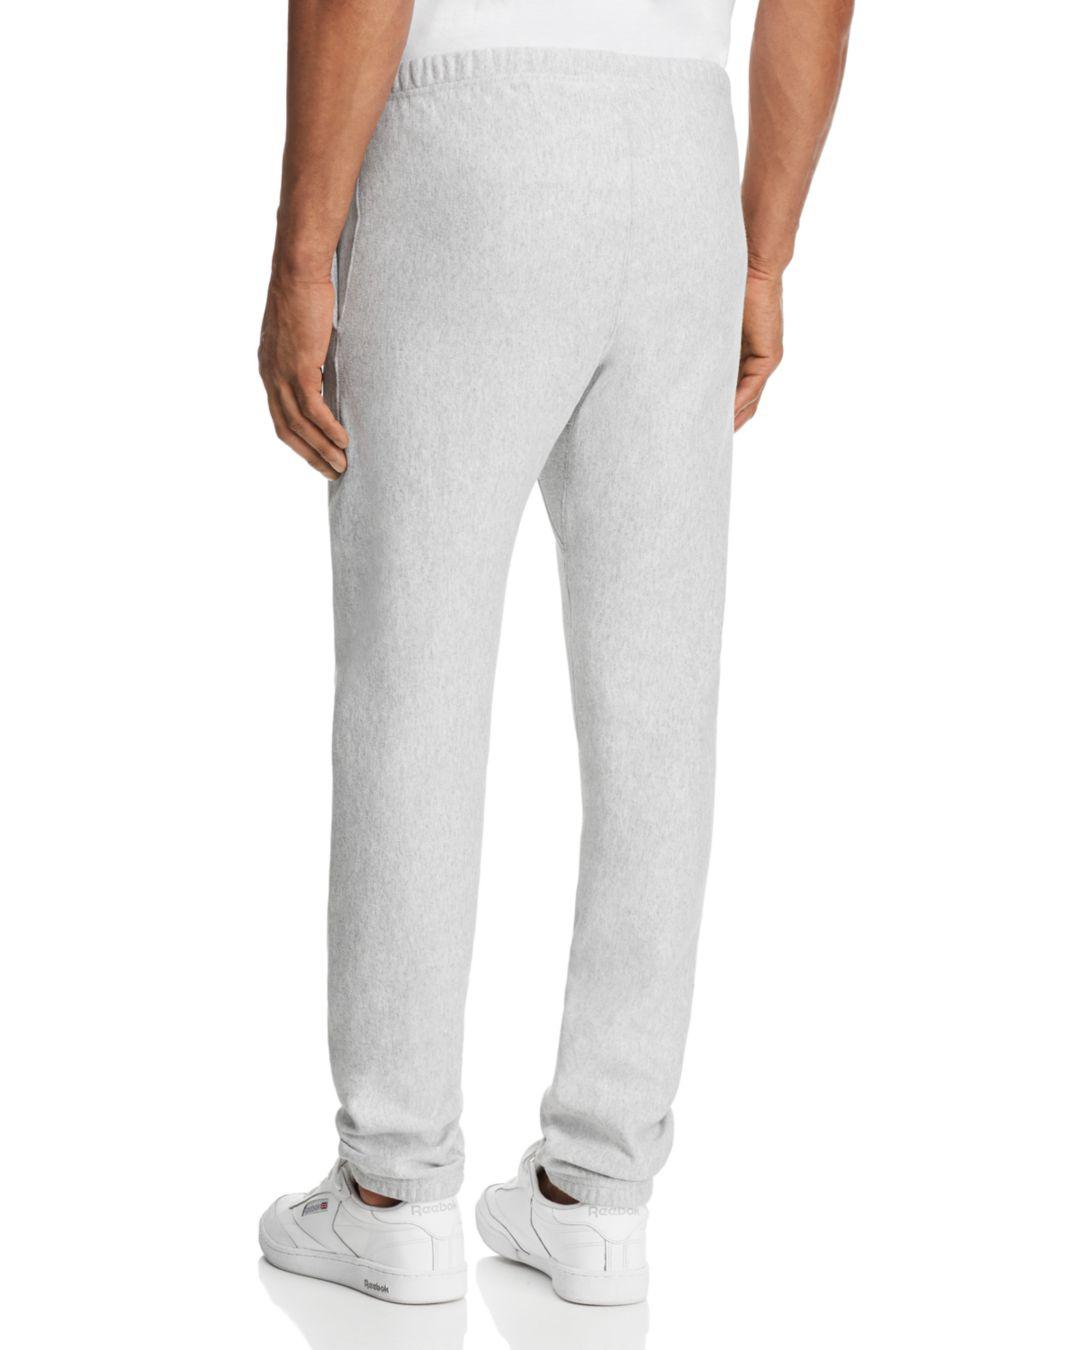 Champion Classic Sweatpants in Heather Grey (Gray) for Men - Lyst